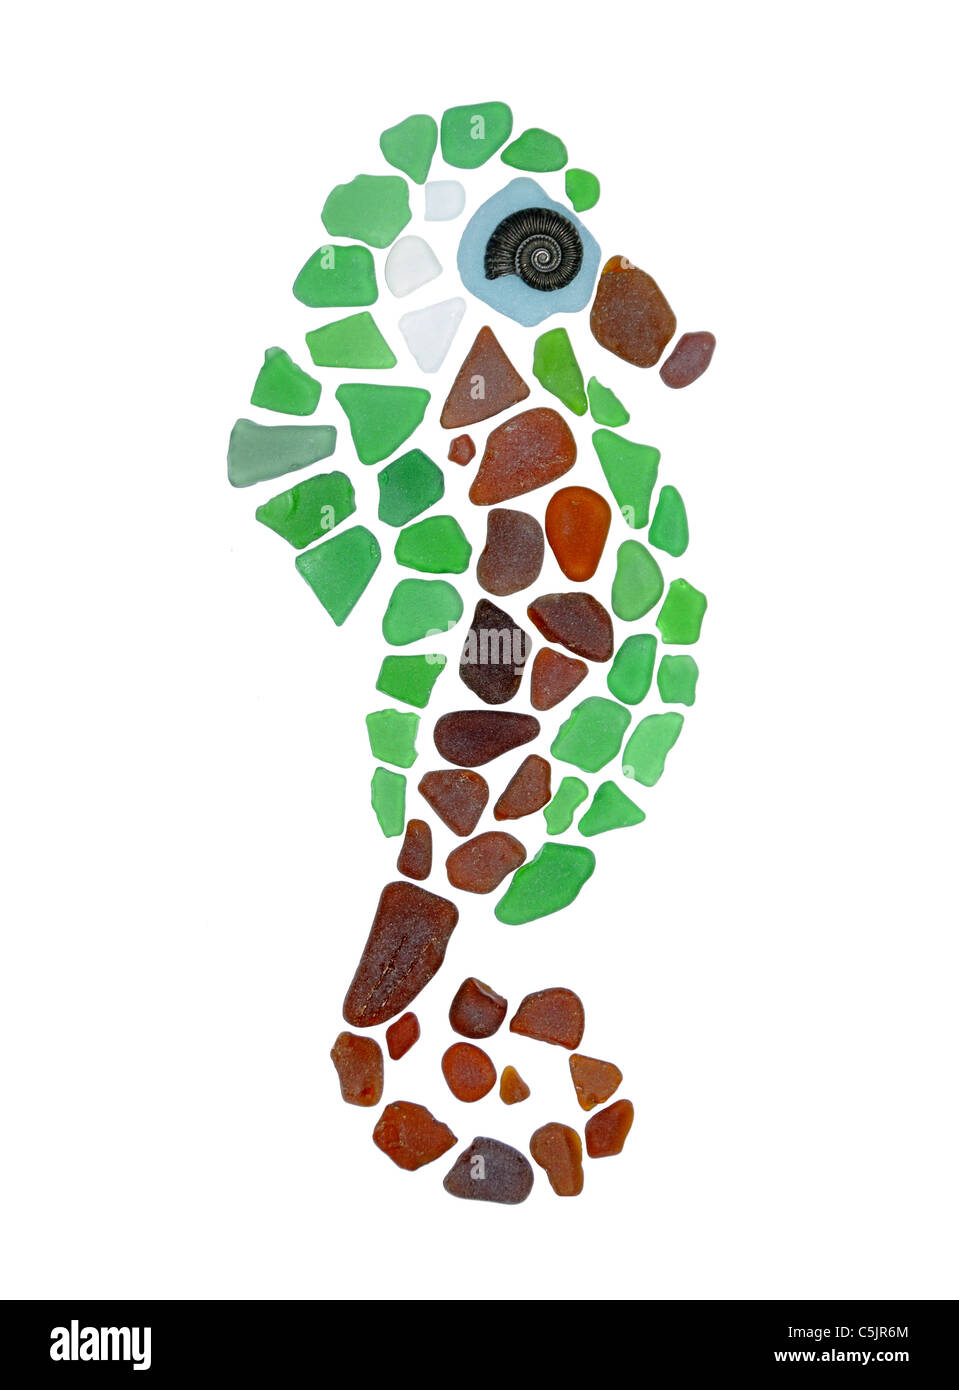 A mosaic of a seahorse made from seaglass - glass collected from the beach - and an ammonite fossil. Isolated on pure white. Stock Photo